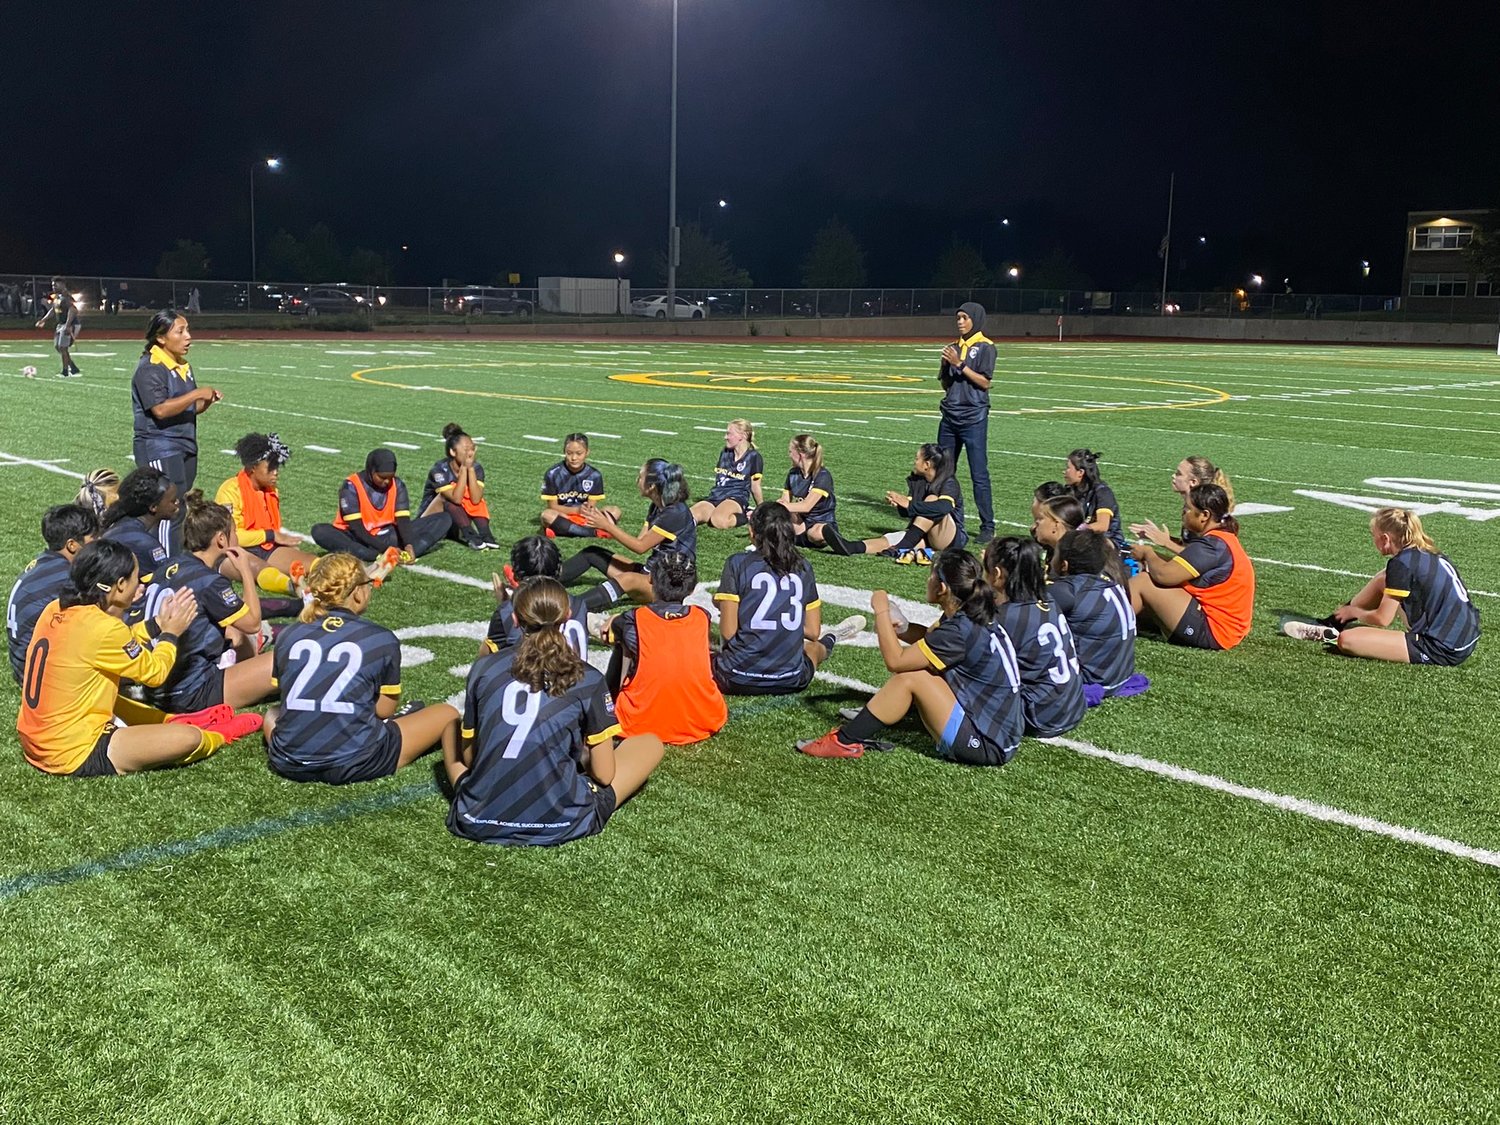 The Cougar girls soccer team gathered on the Como turf after their opening match of the season (Photo by Eric Erickson)